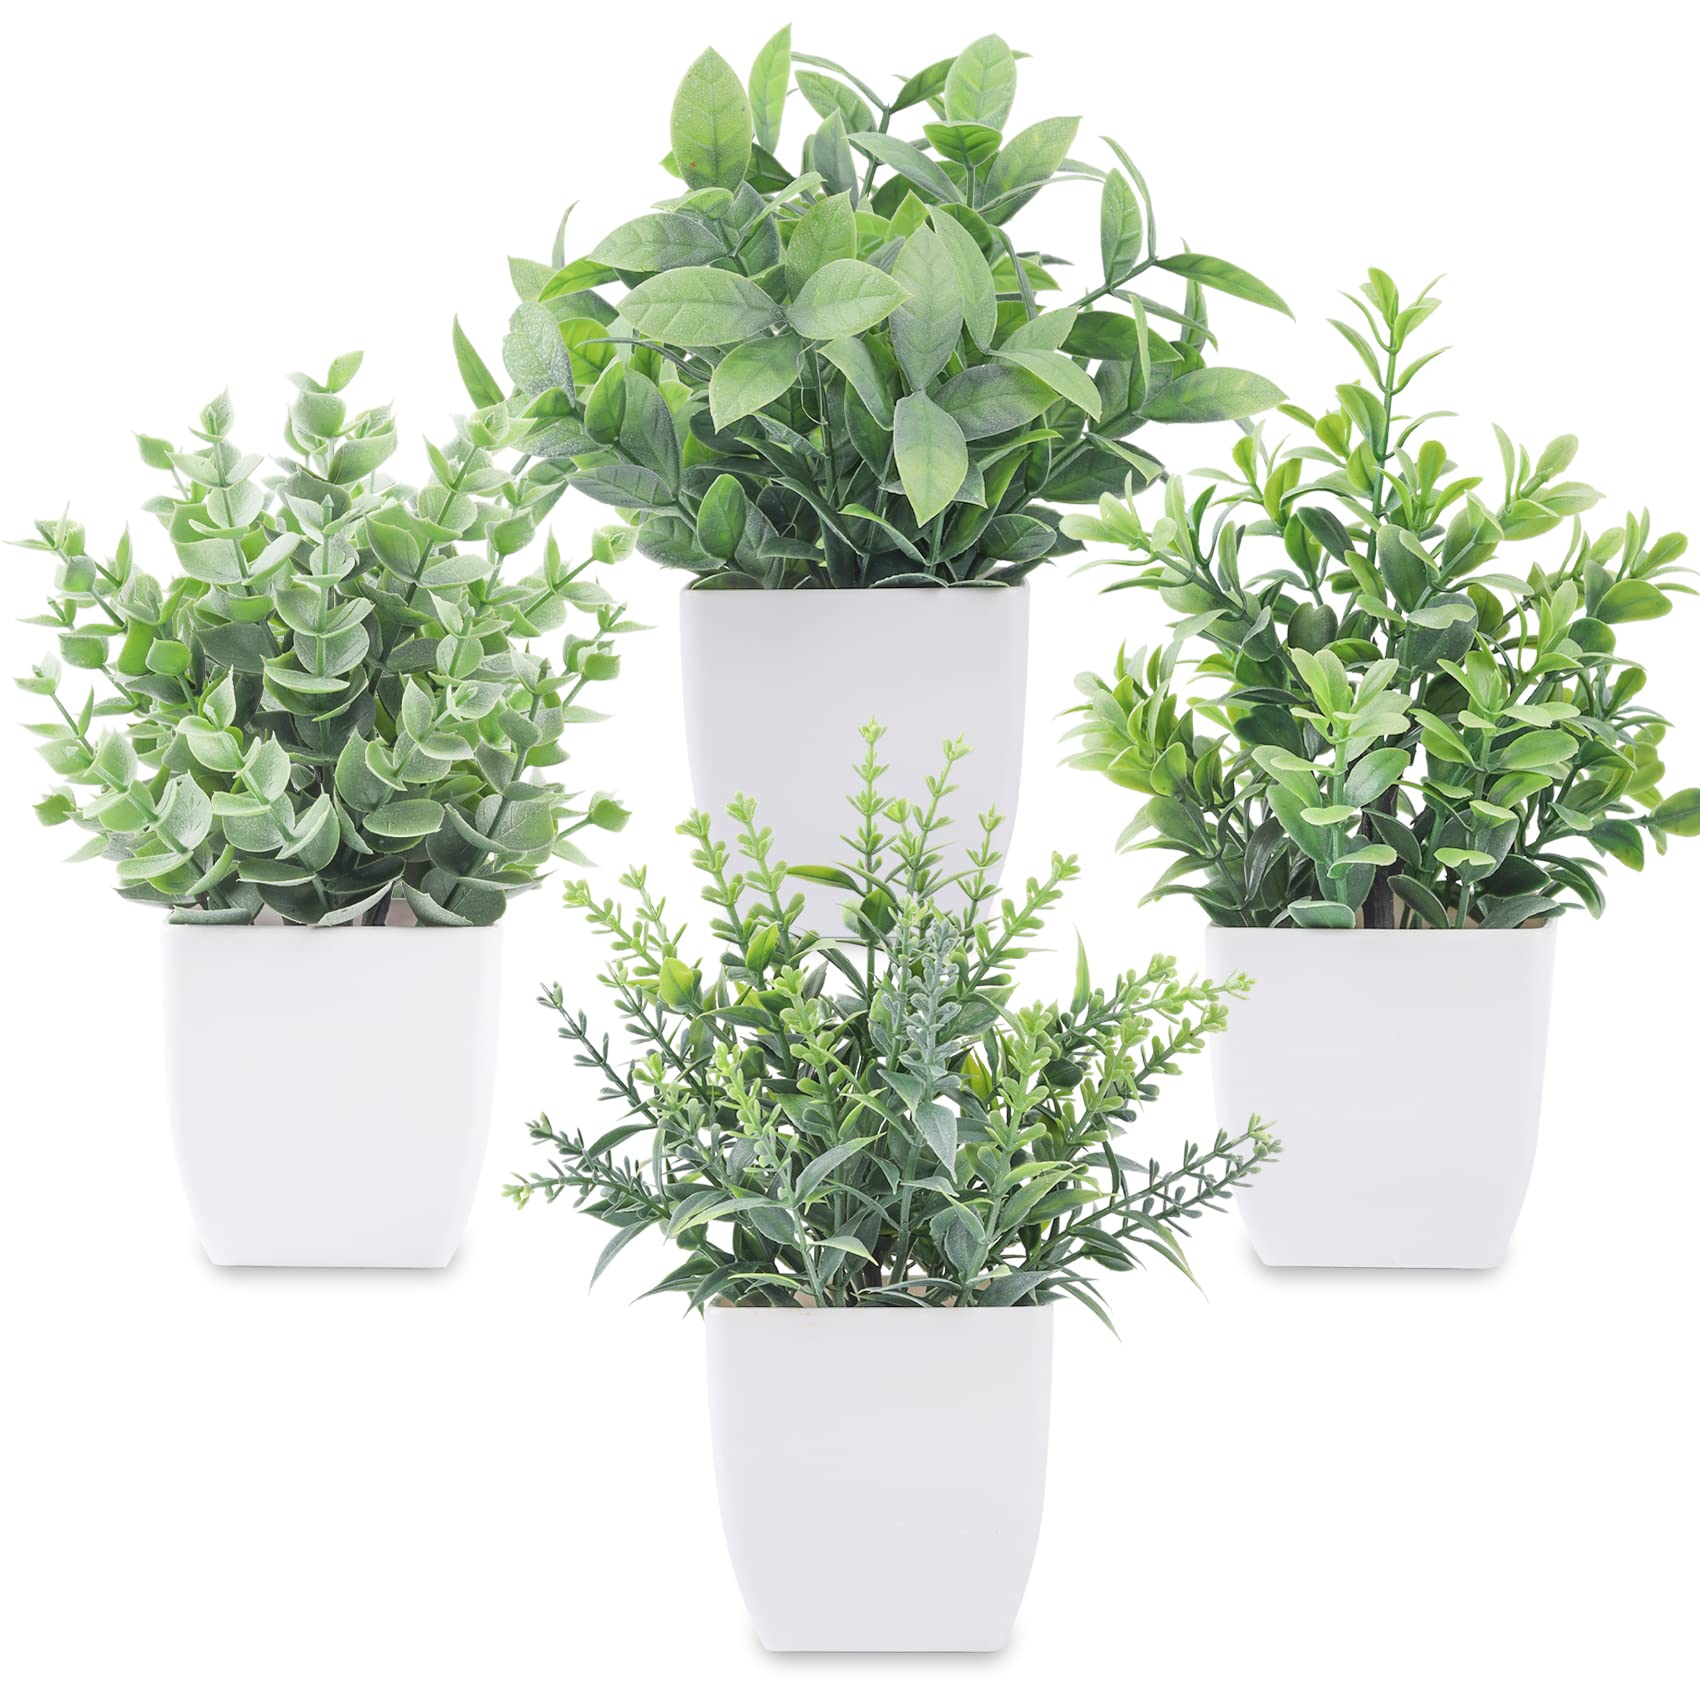 Fake Plants Artificial Greenery Potted Plants Home Indoor Decor